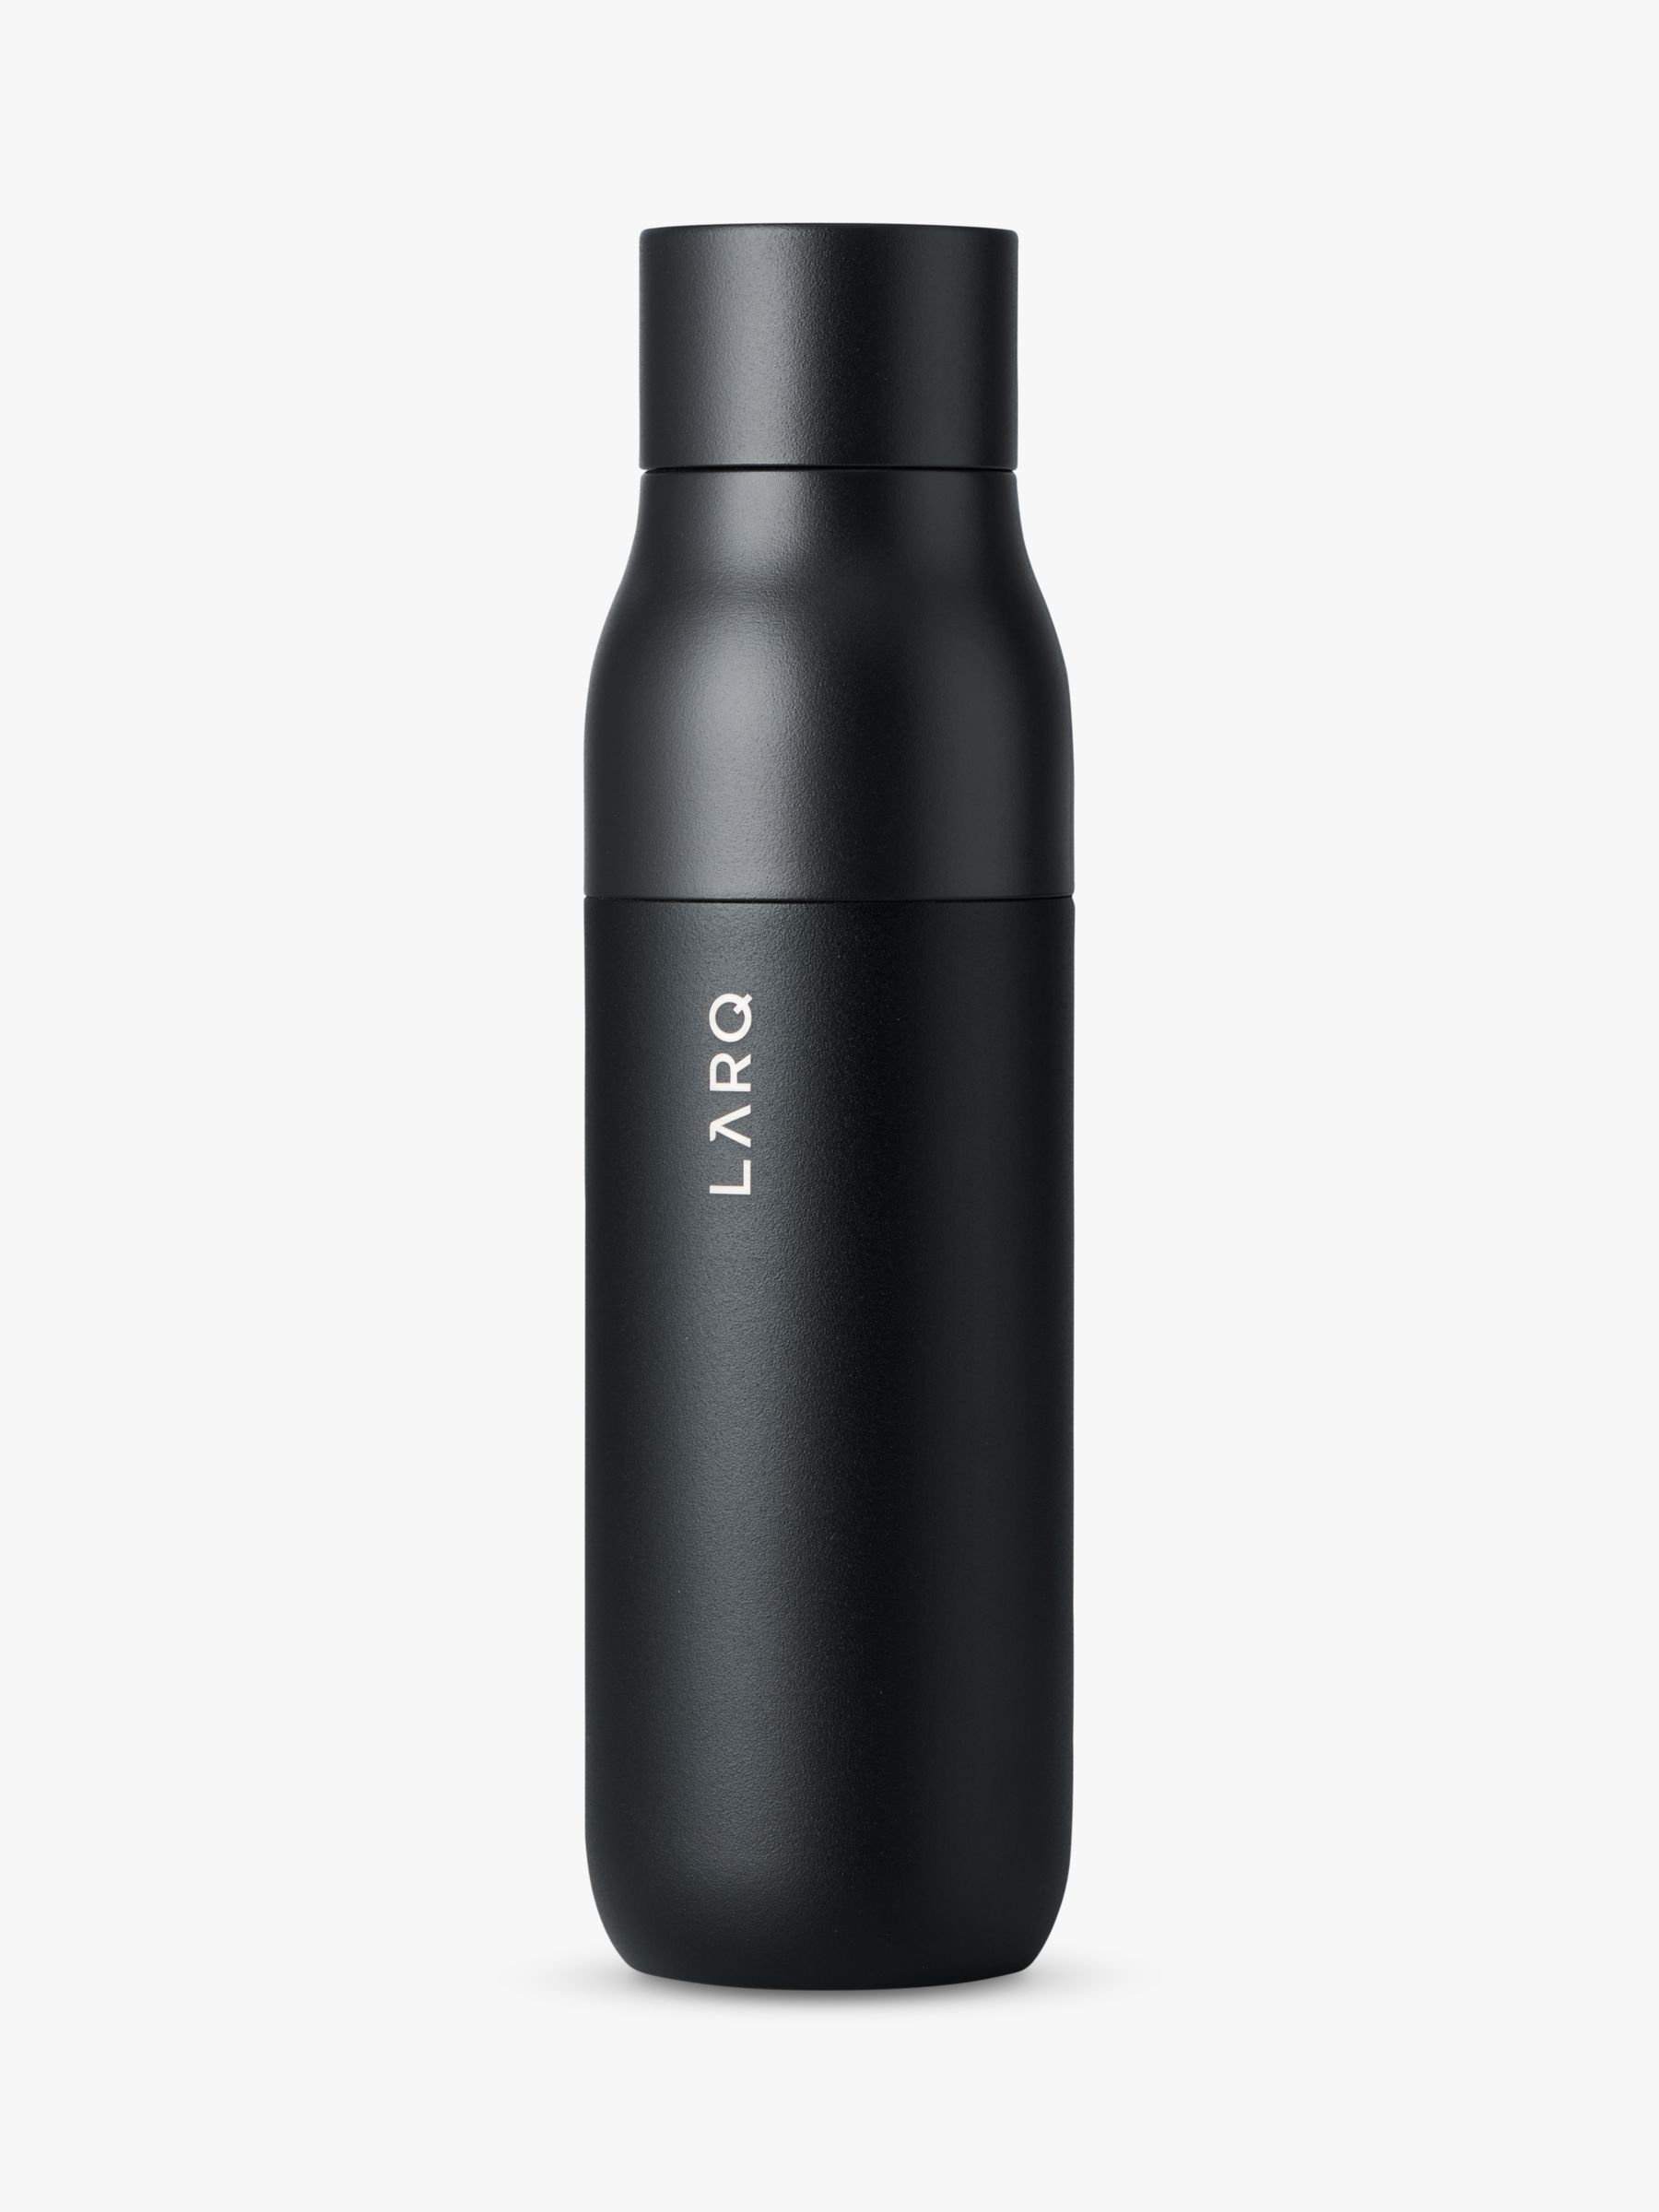 LARQ PureVis Double-Wall Insulated Stainless Steel Self-Cleaning &  Purifying Water Filter Bottle, 500ml, Obsidian Black